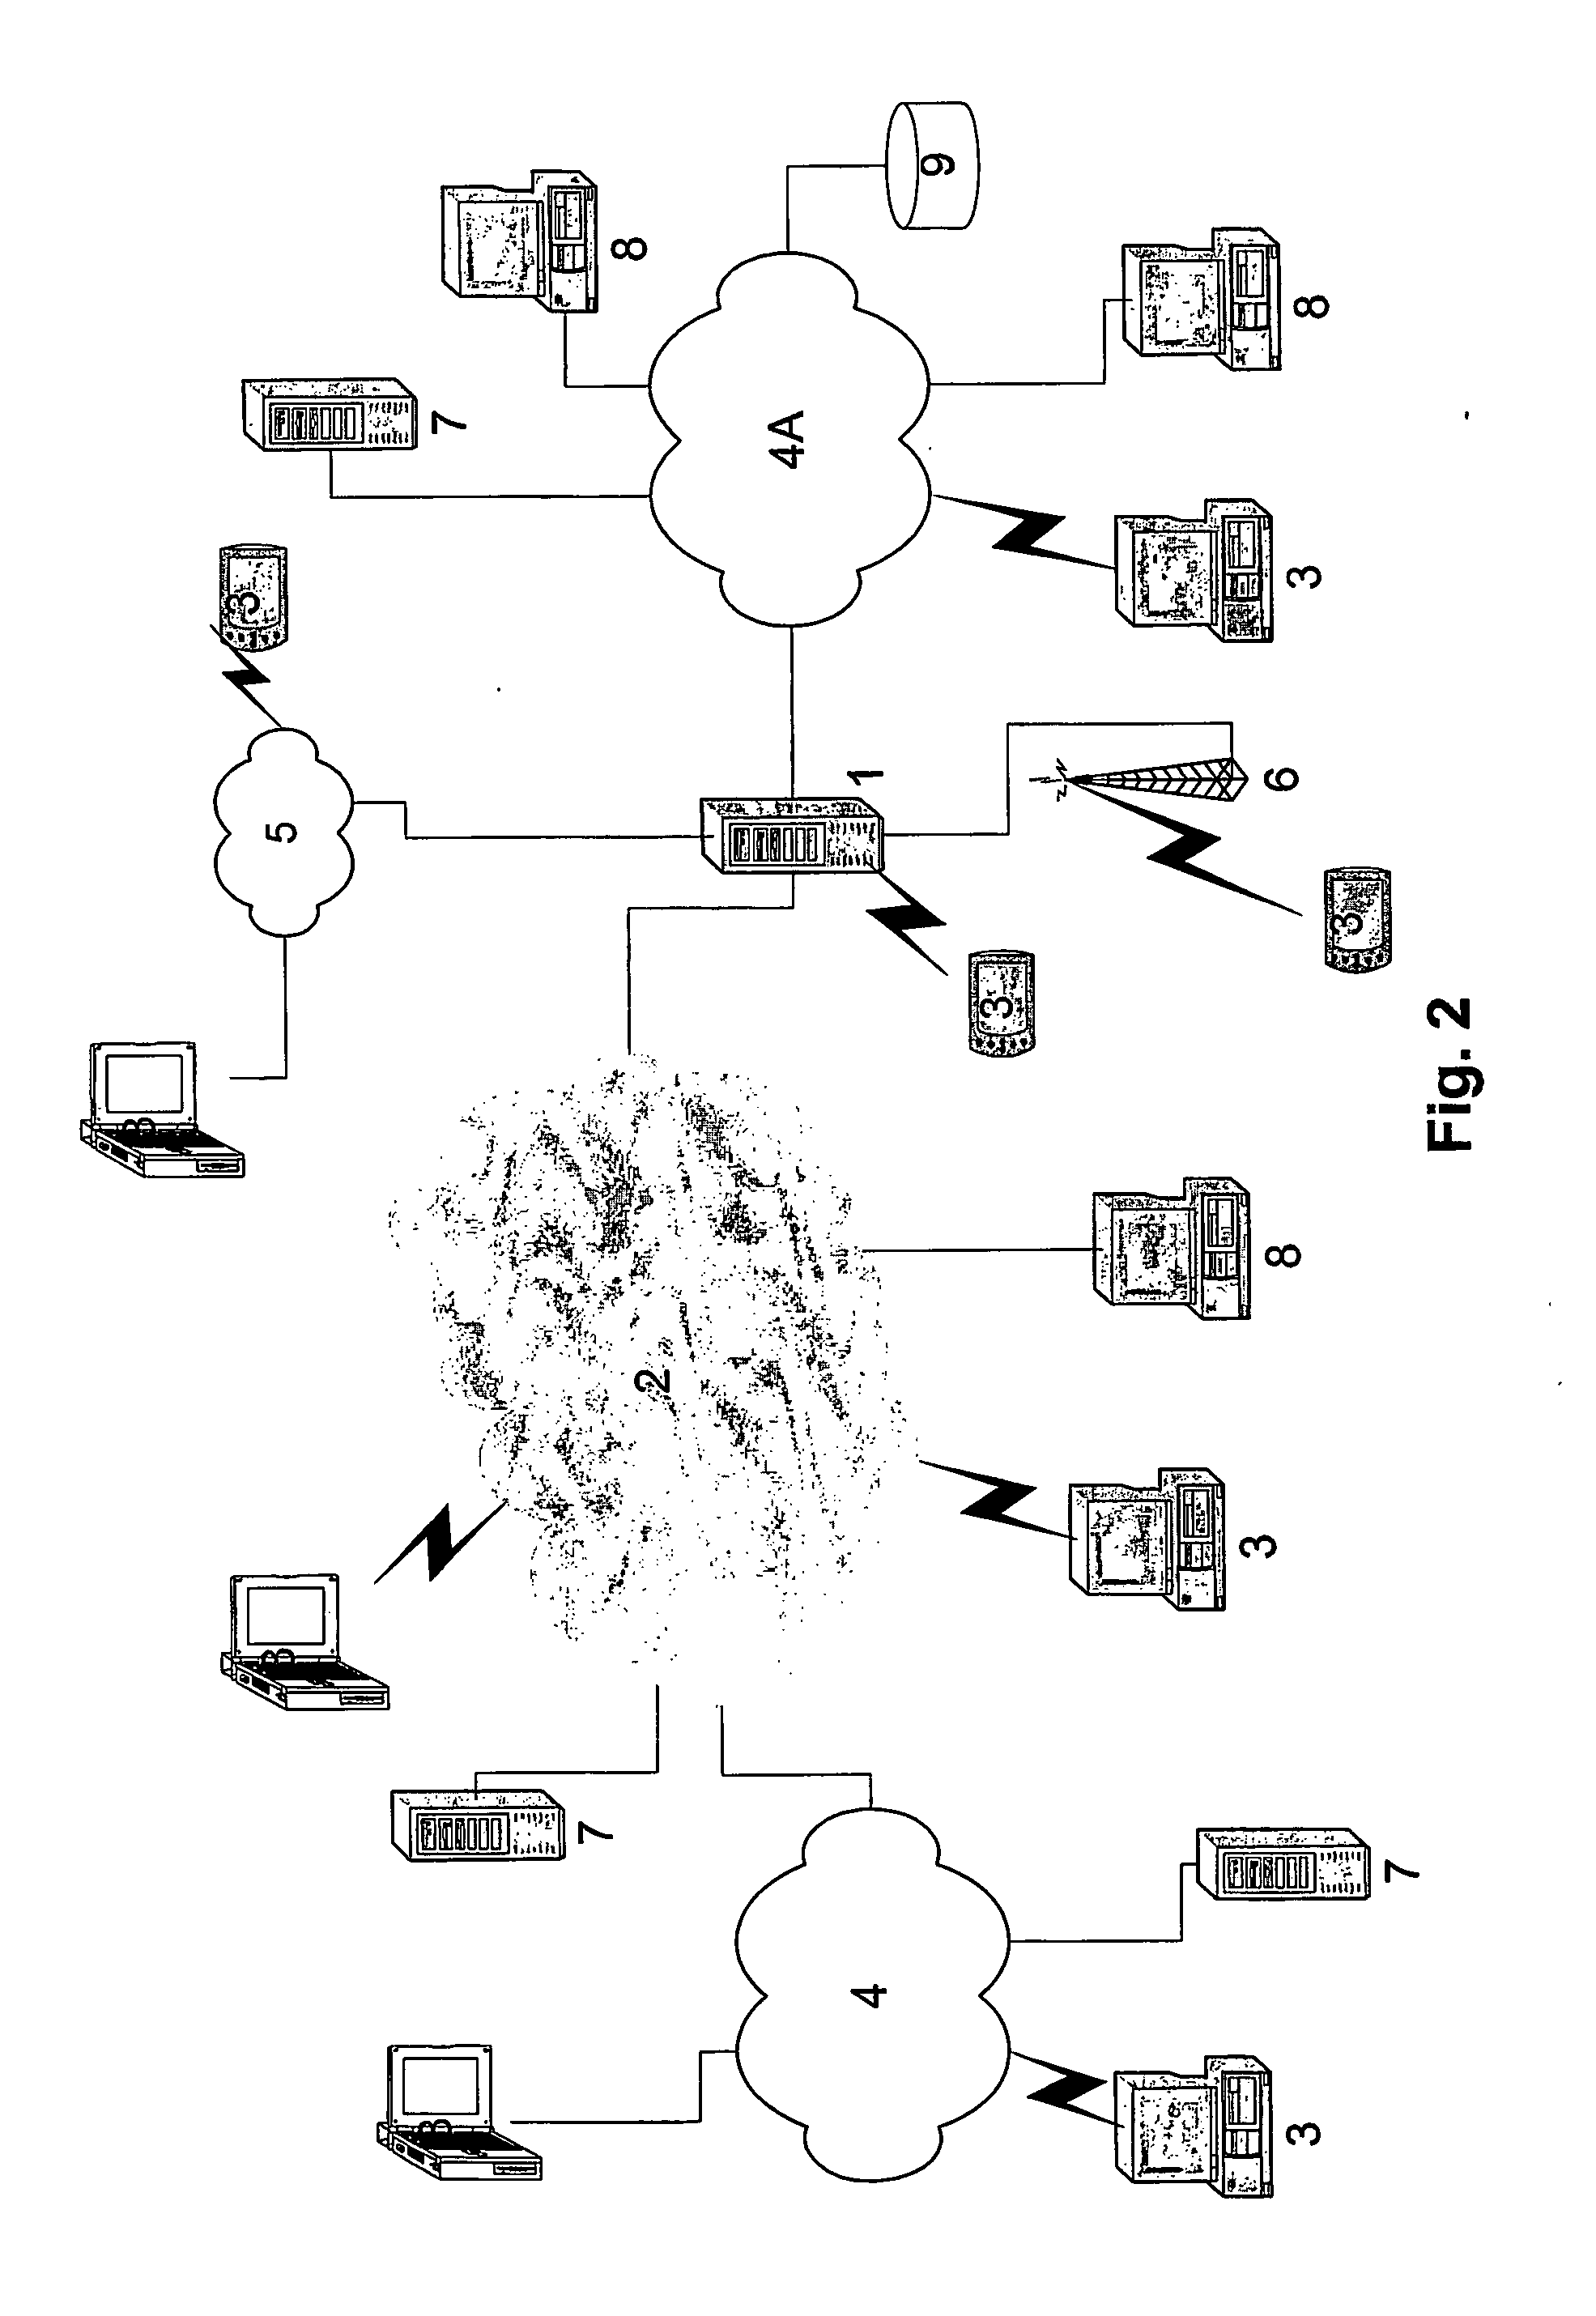 Terminal connectivity system